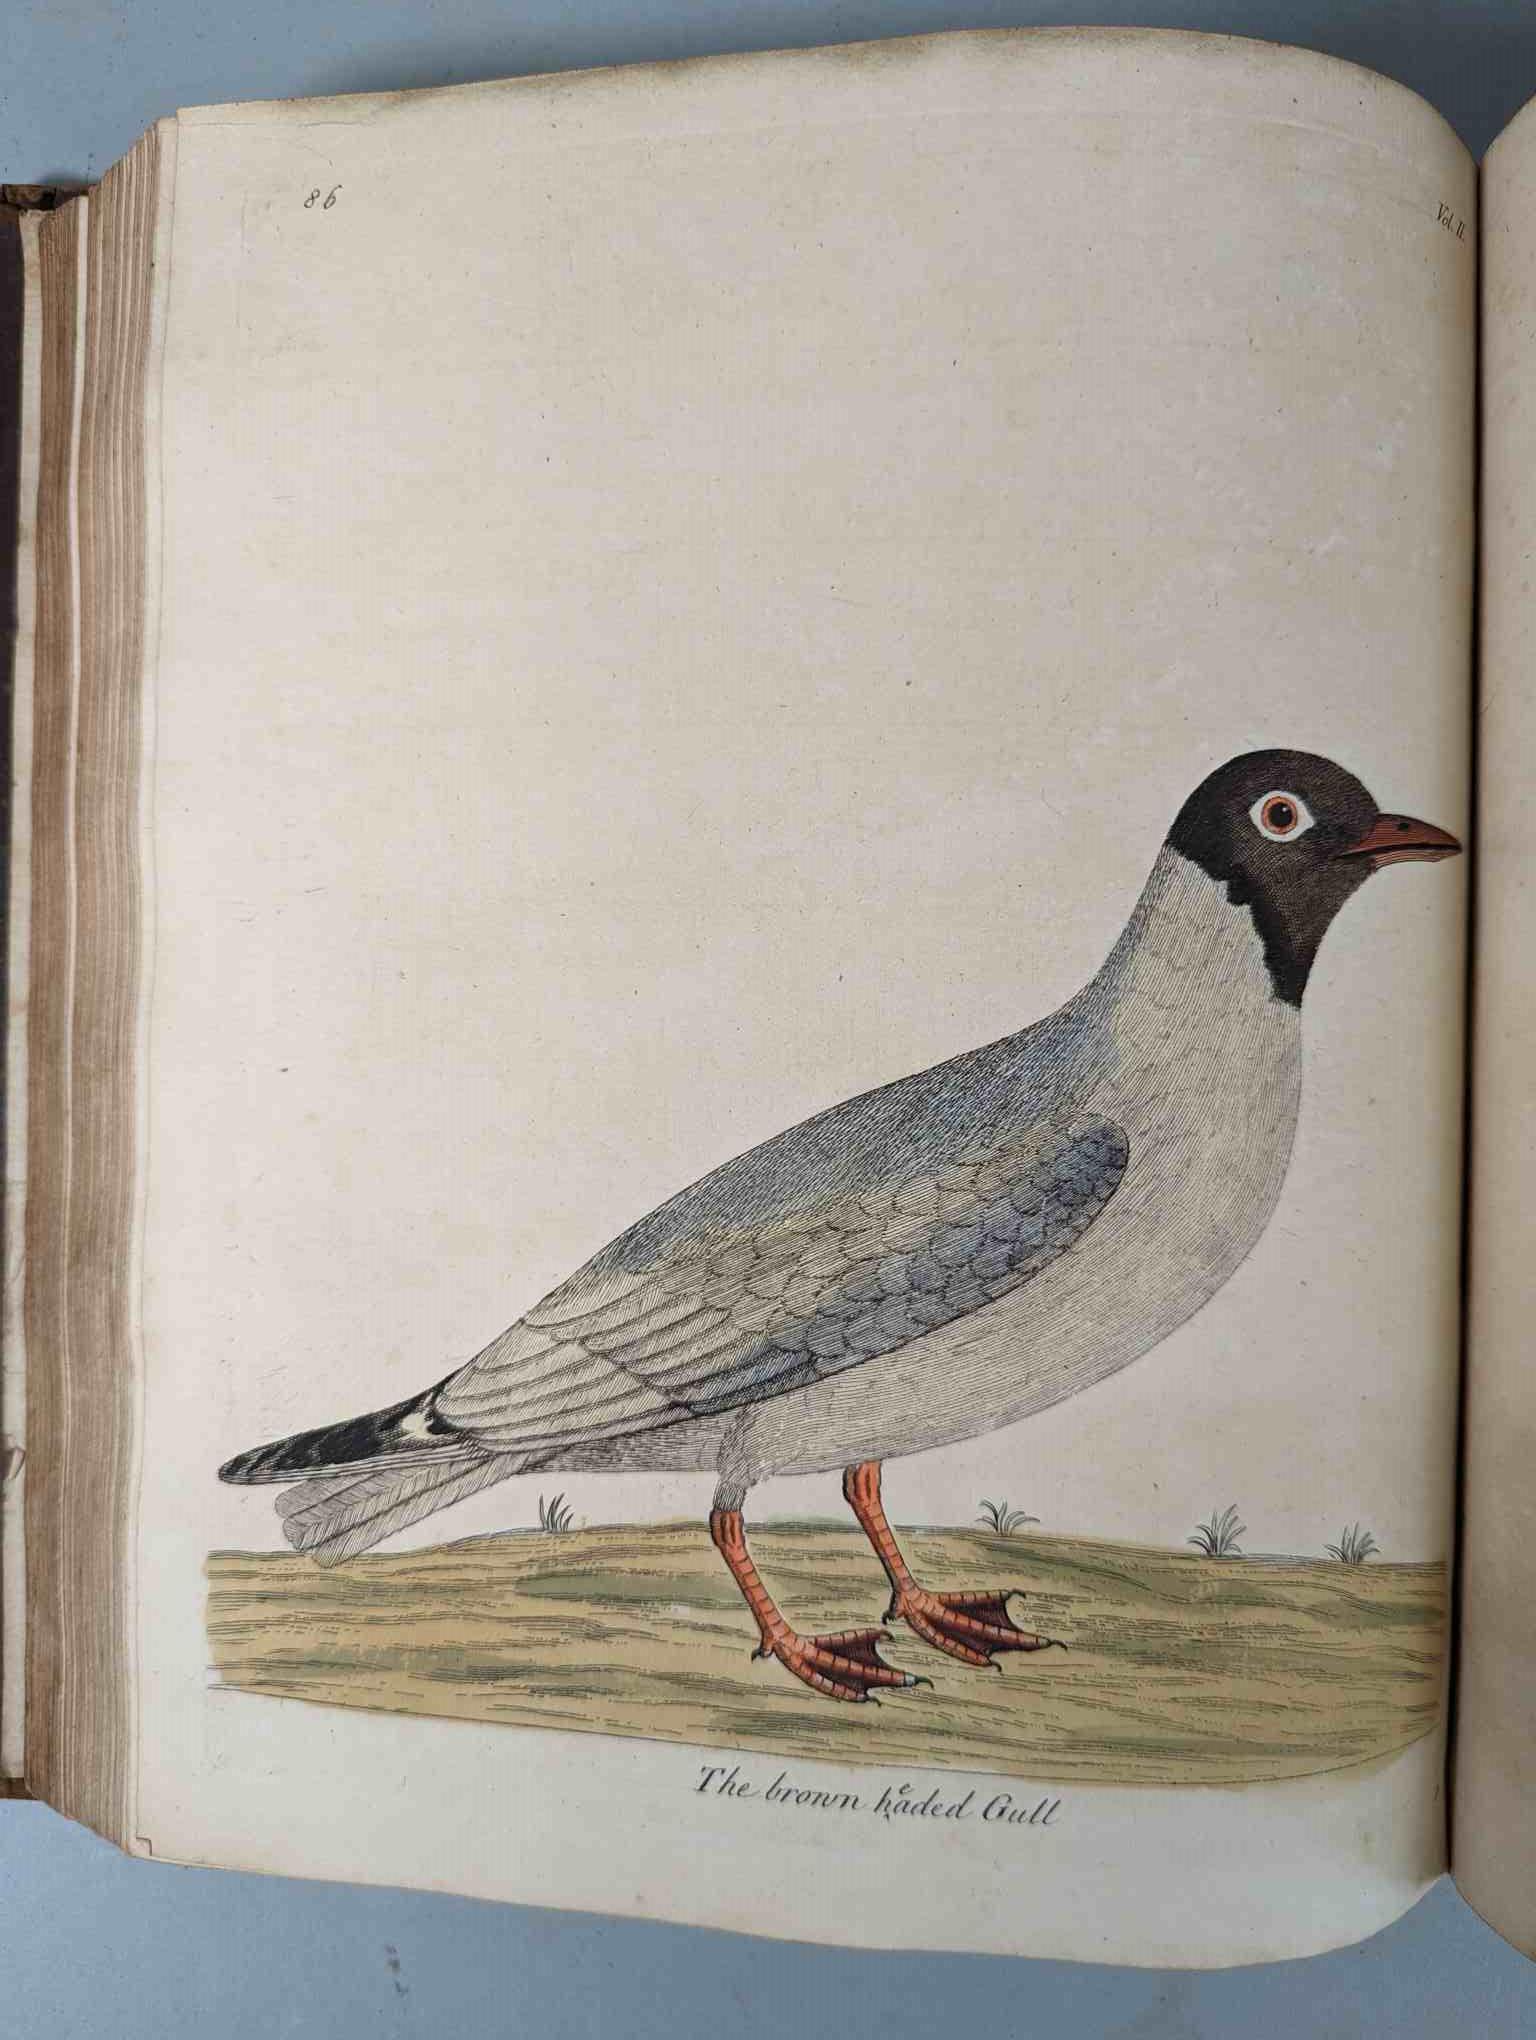 ALBIN, Eleazar. A Natural History of Birds, to which are added, Notes and Observations by W. - Image 190 of 208